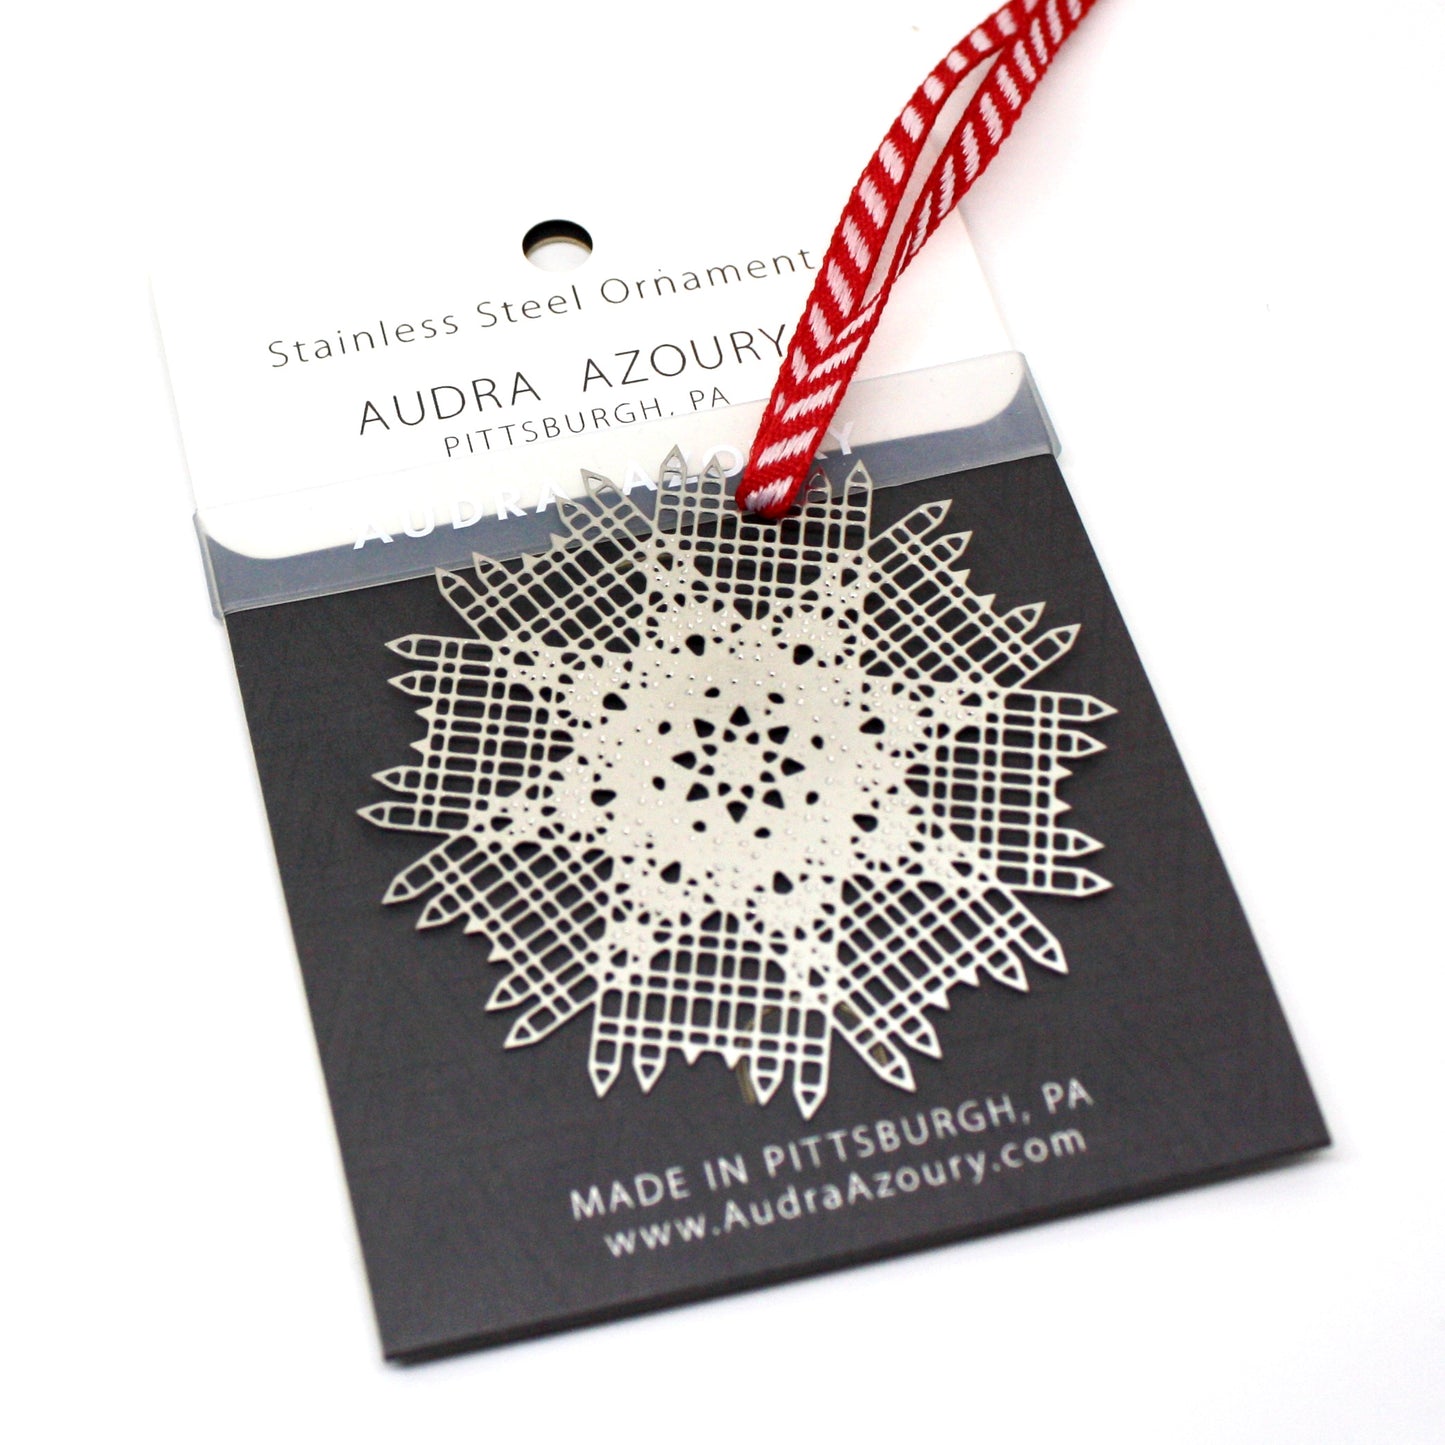 PPG Snowflake Stainless Steel Ornament by Audra Azoury